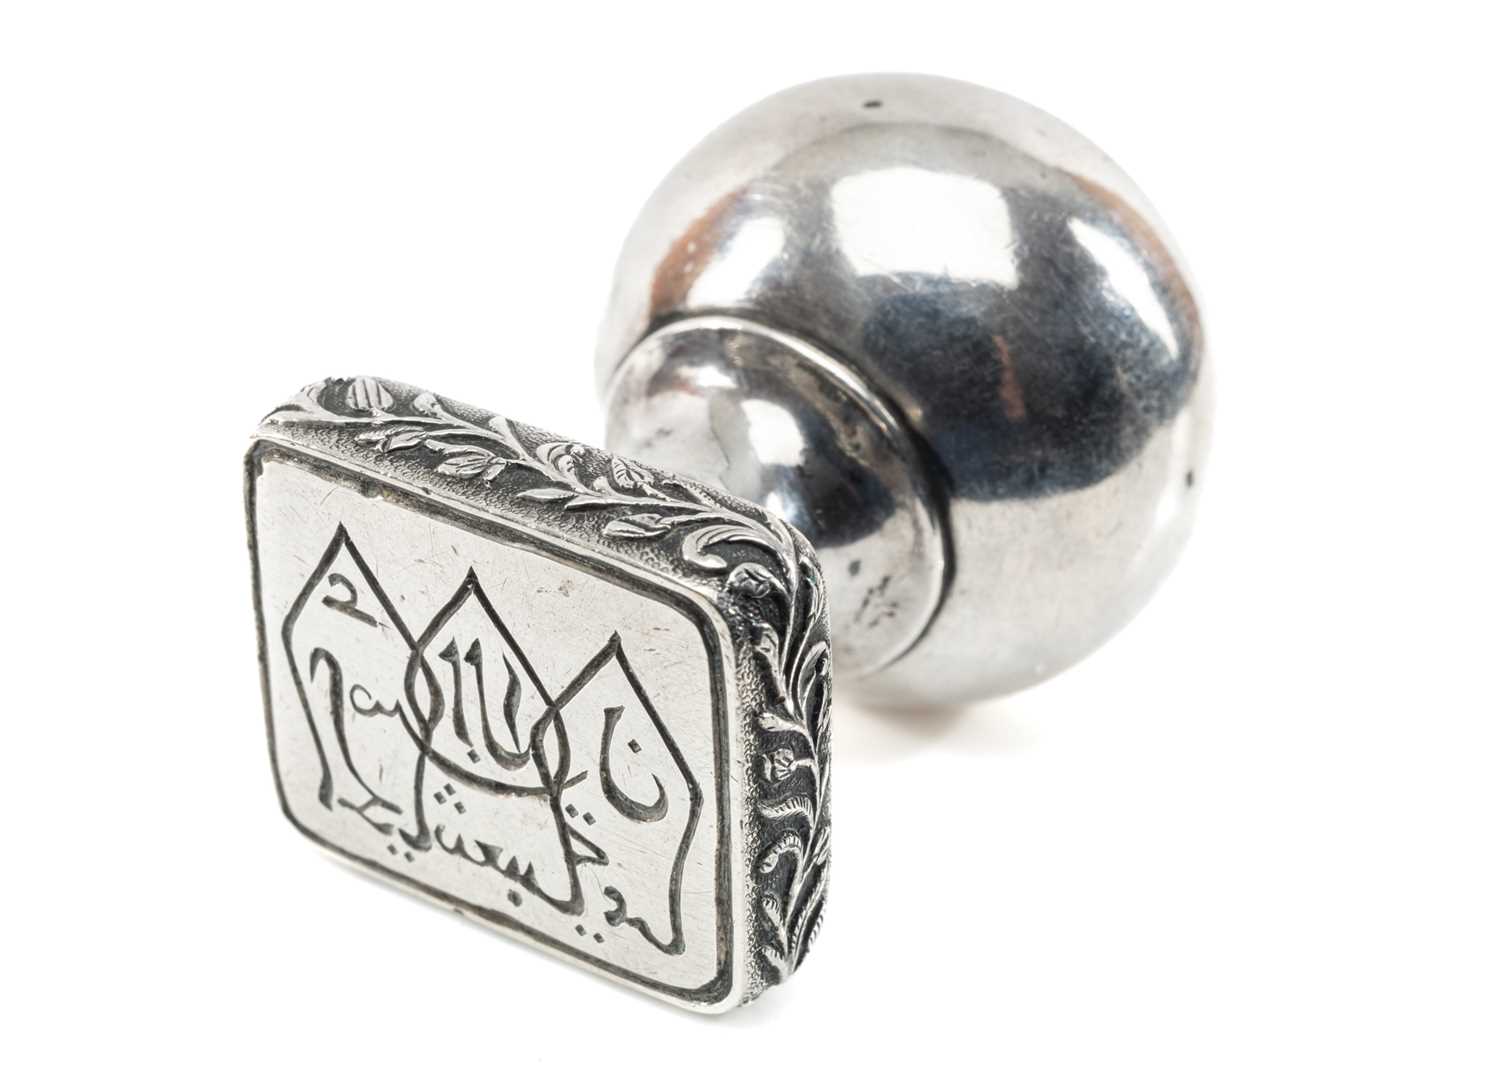 WHITE METAL ISLAMIC CALIGRAPHY DESK SEAL, probably 19th C., bulbous handle above rectangular base